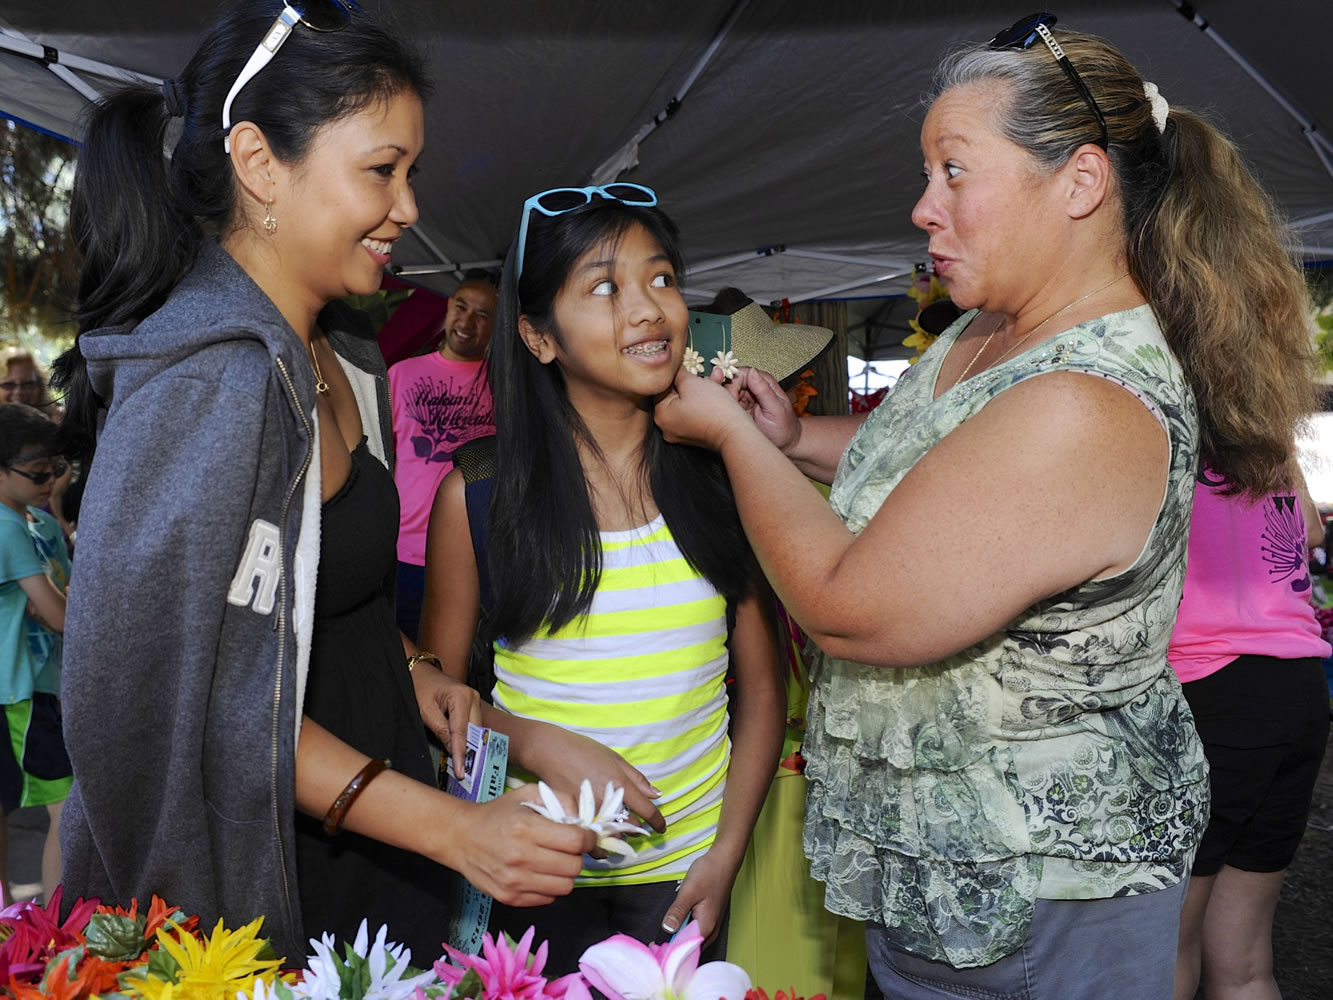 Kalei Sukhabut, left, choses a pua for her daughter, Sydney, with the help of Kuulei Gumapac, center, at the Ho'ike and Hawaiian Festival on Saturday at Esther Short Park in Vancouver.